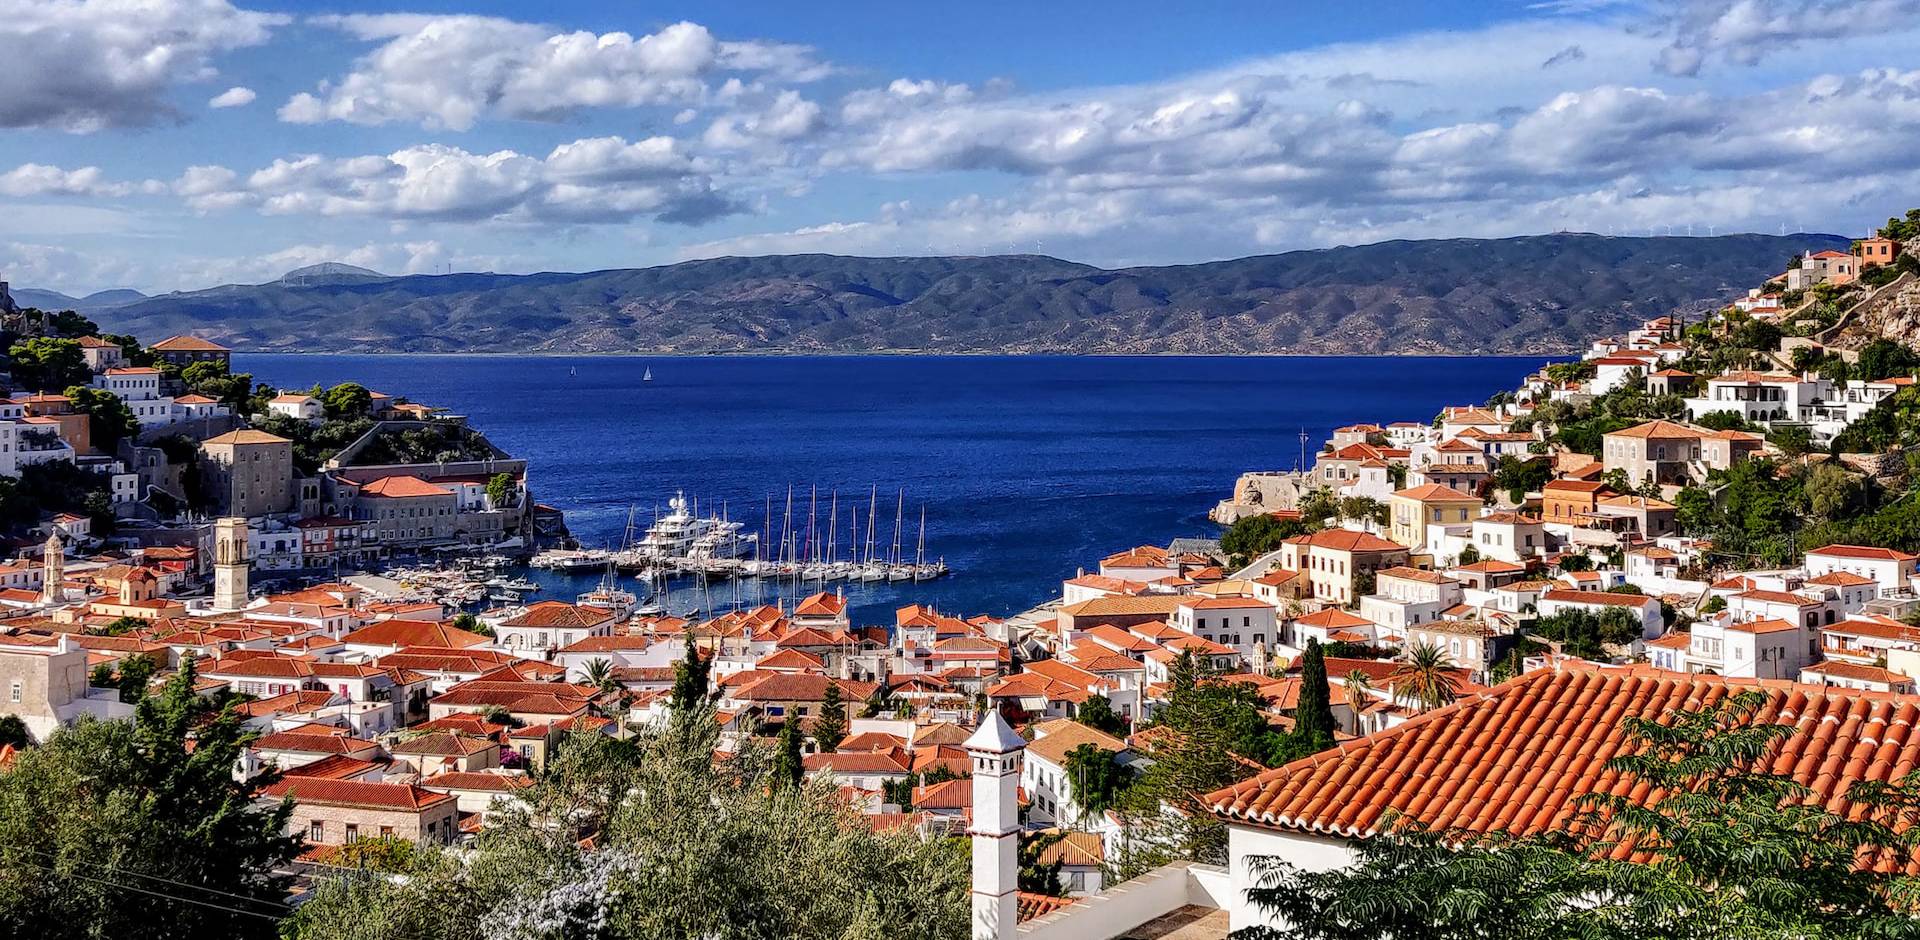 Best Greek islands close to Athens: The Saronic Gulf